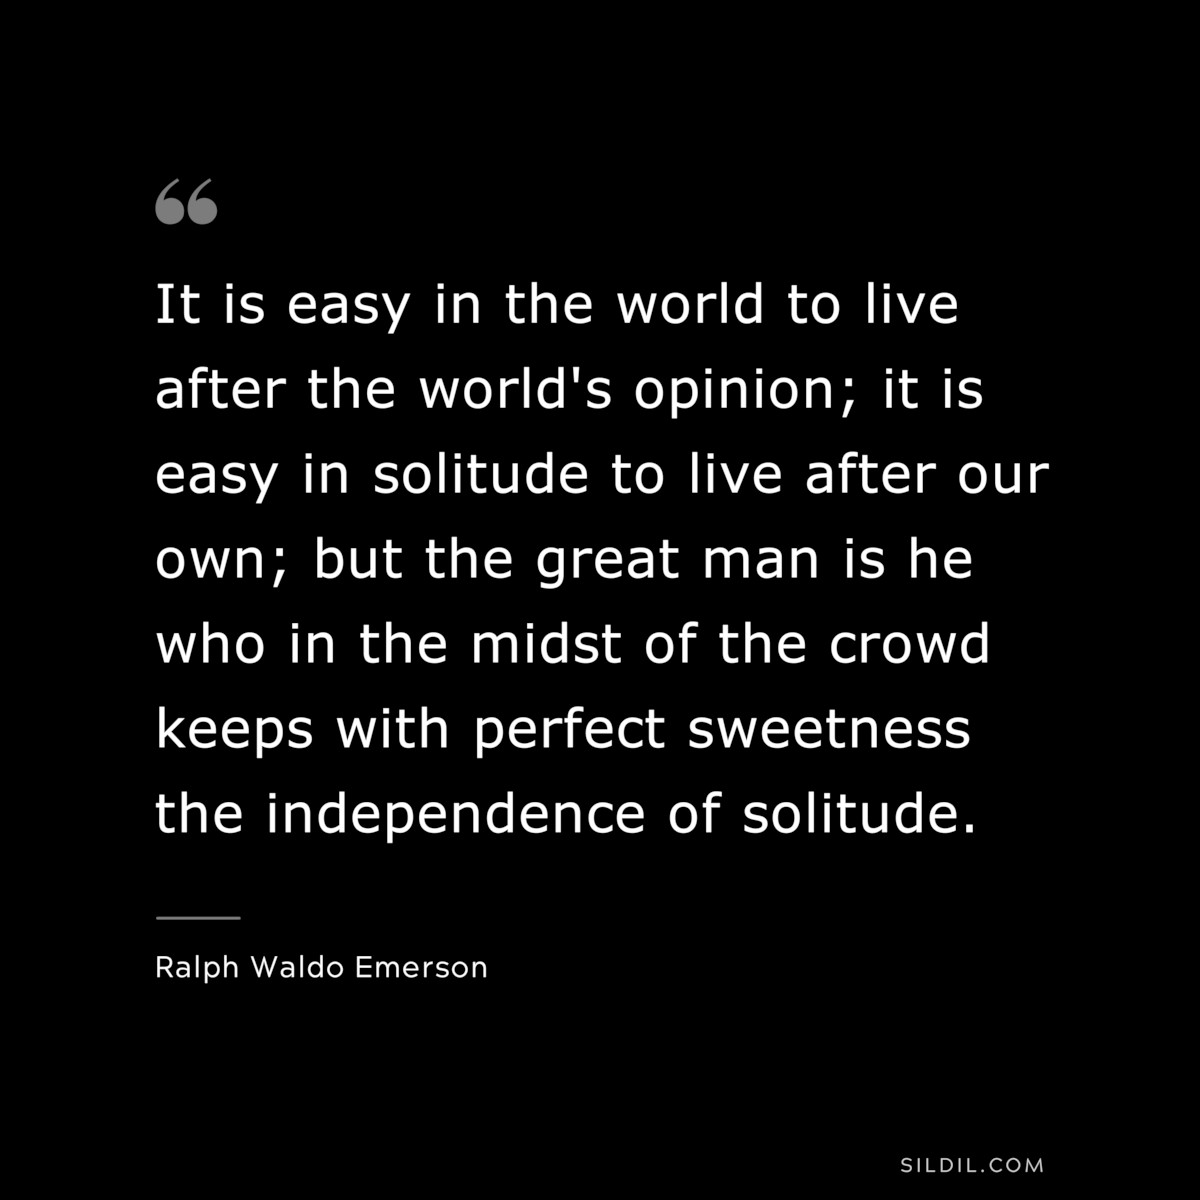 It is easy in the world to live after the world's opinion; it is easy in solitude to live after our own; but the great man is he who in the midst of the crowd keeps with perfect sweetness the independence of solitude. — Ralph Waldo Emerson